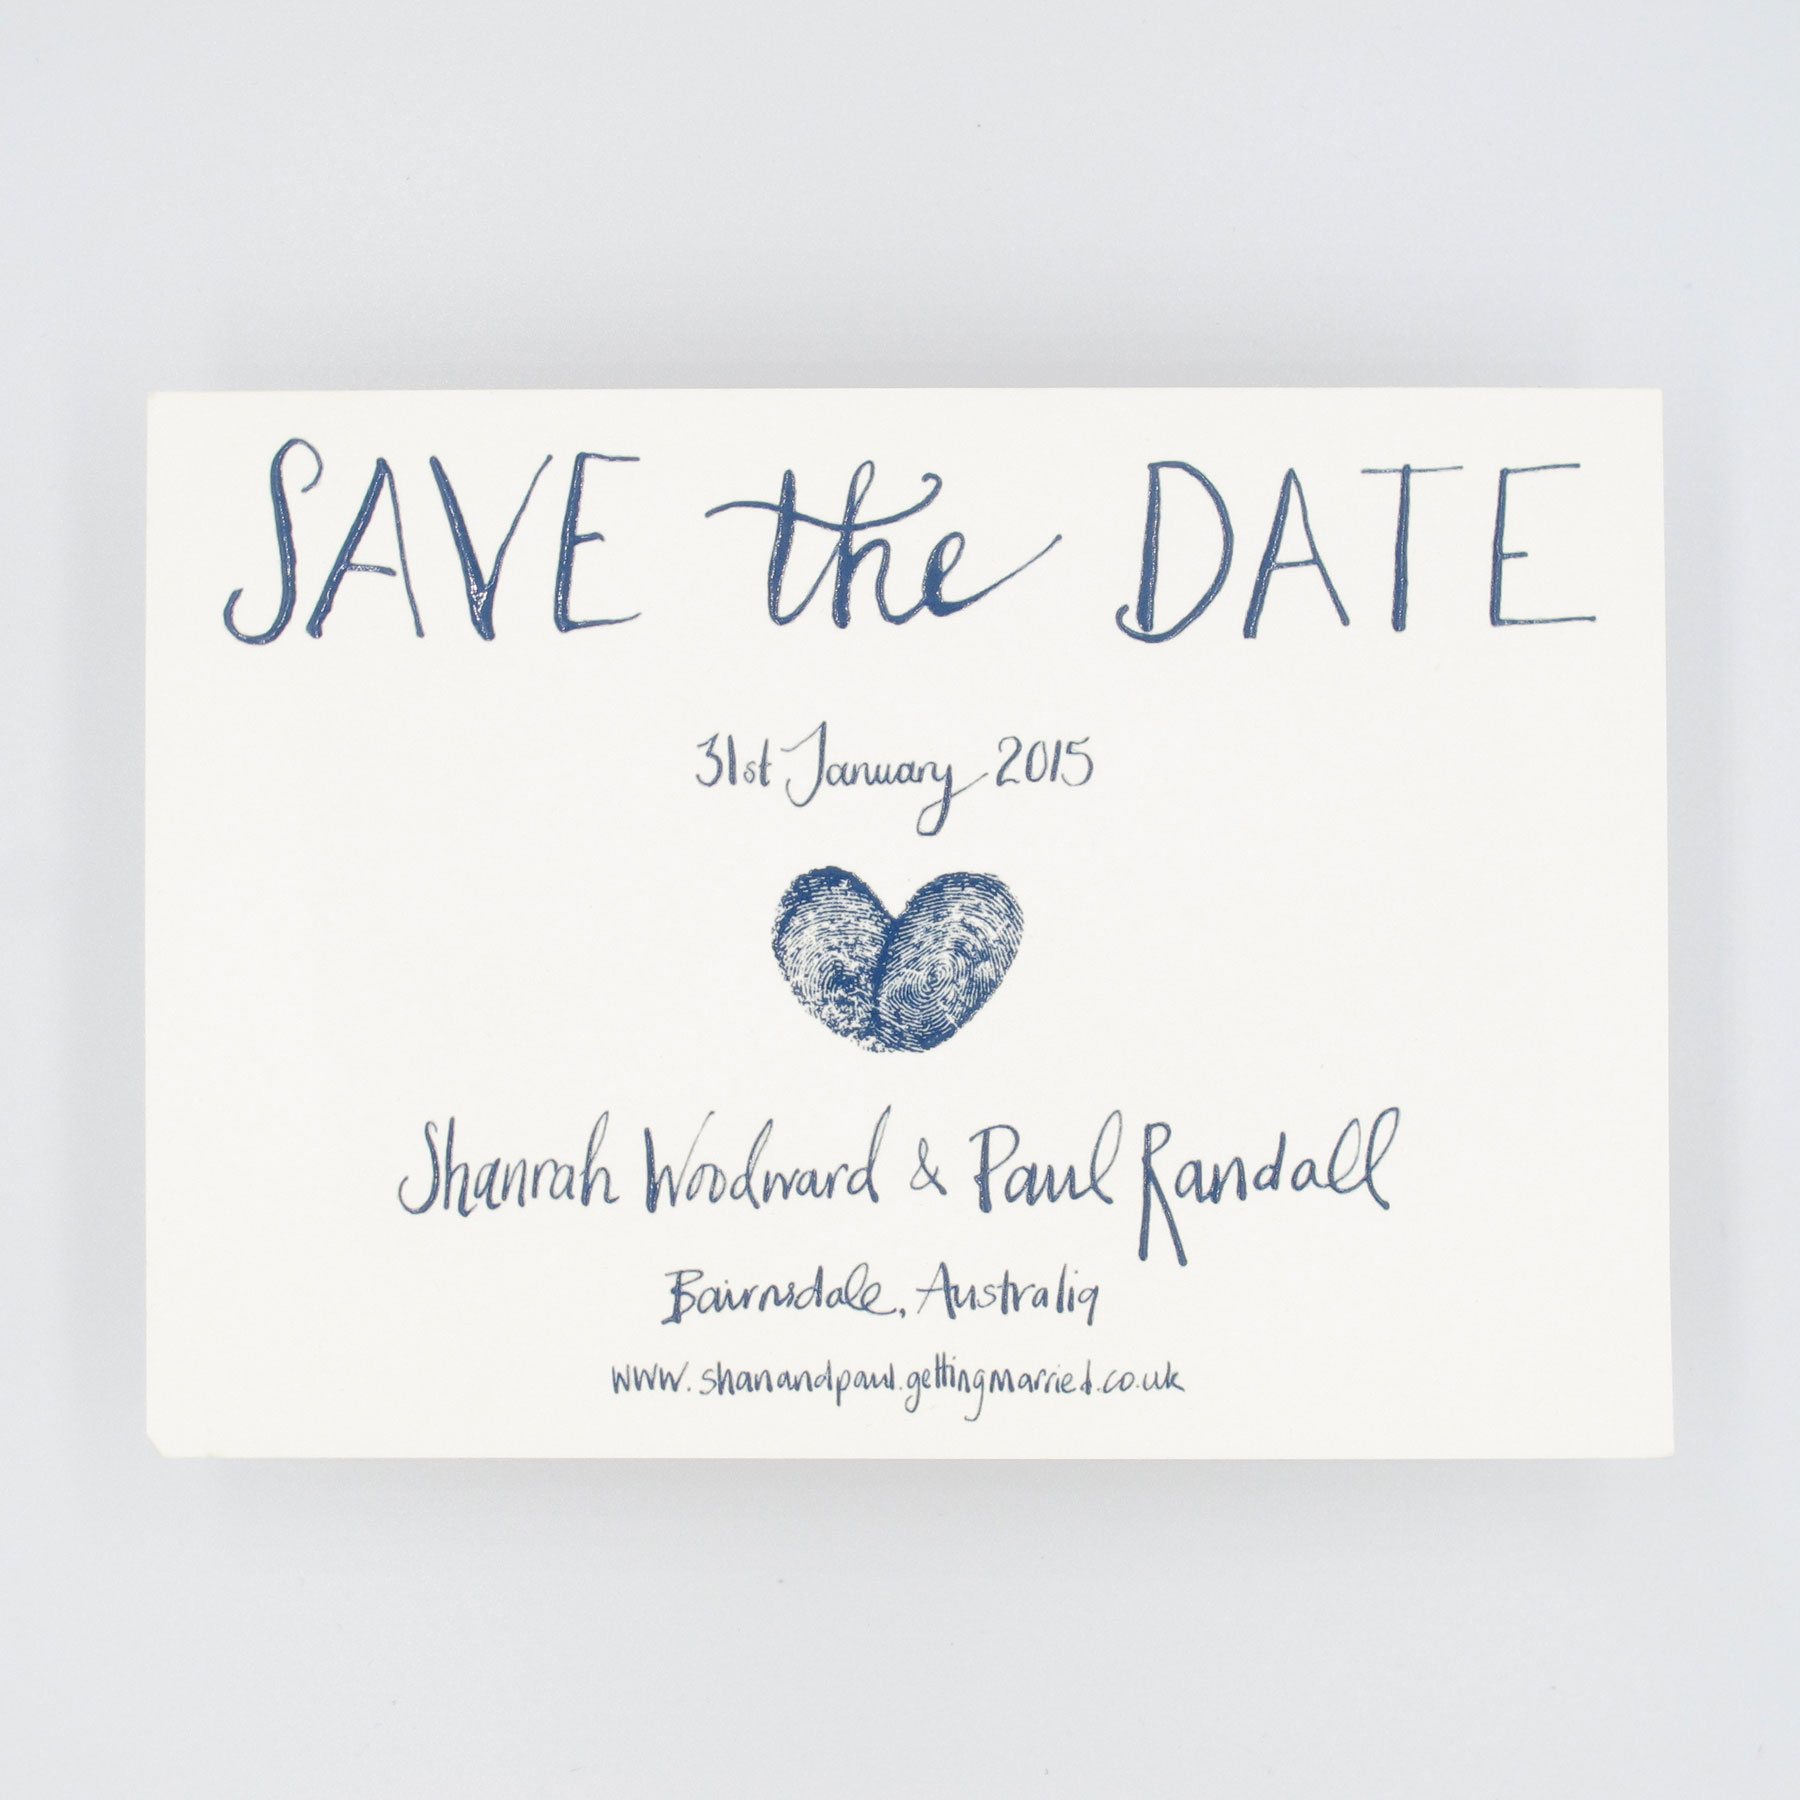 Pen and Ink Save the Dates